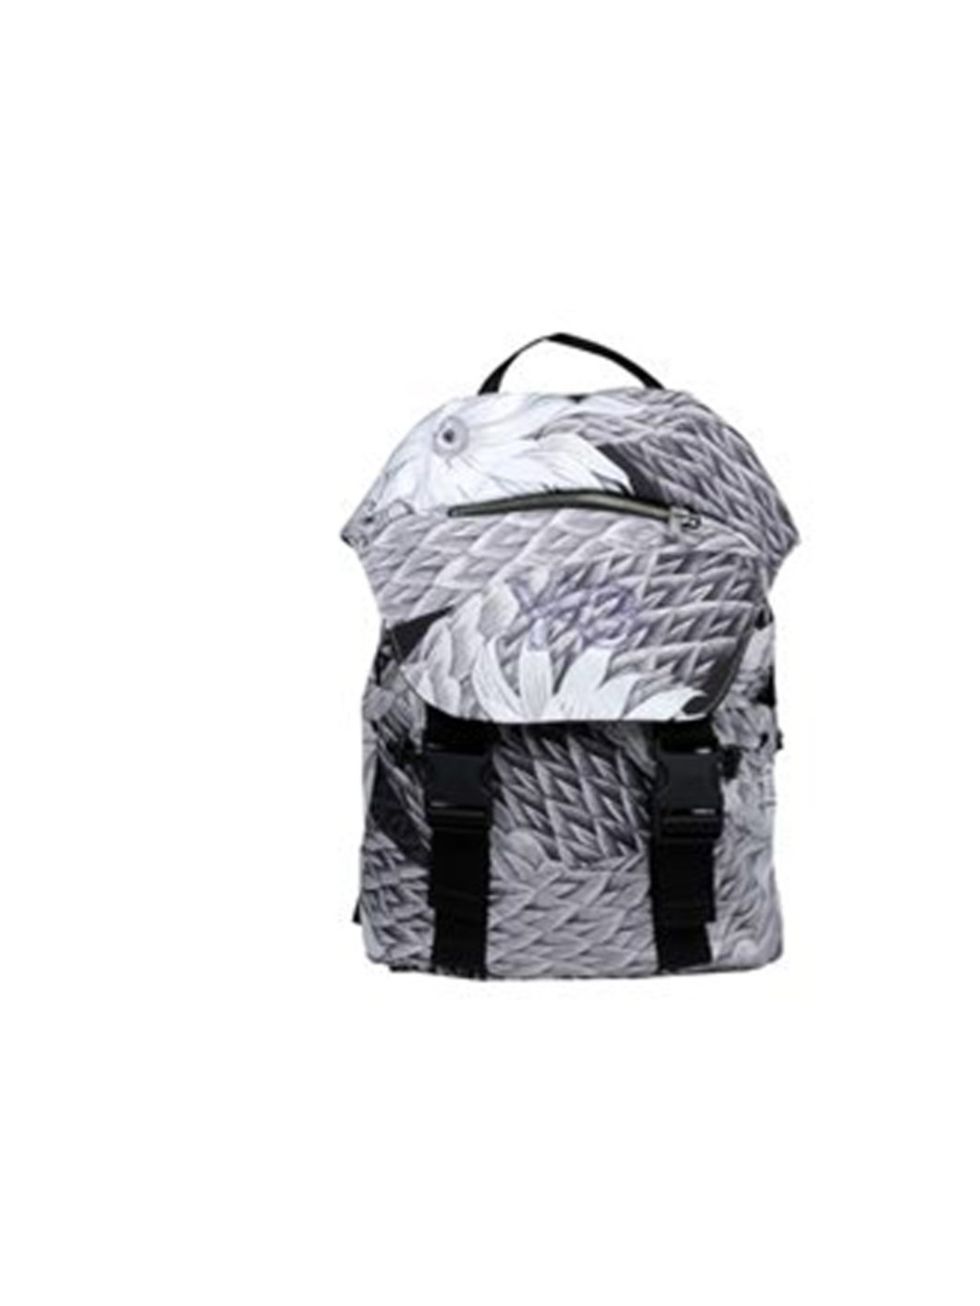 <p>Y3 backpack £200 at <a href="http://www.thecorner.com/gb/women/rucksack_cod45190362cb.html">thecorner.com</a></p>